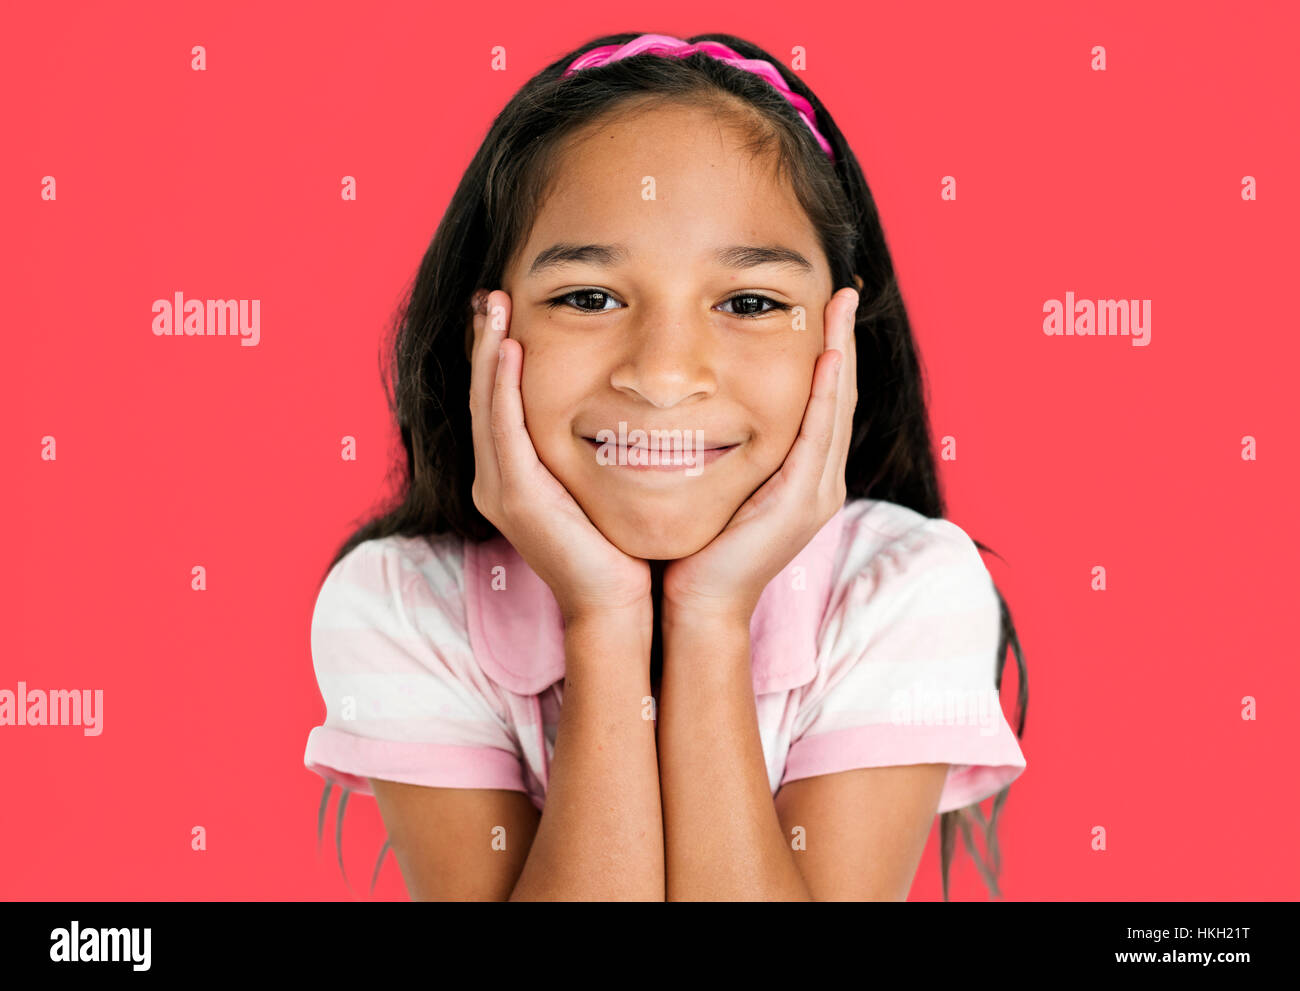 Asian Girl Happiness Emotion Playful Concept Stock Photo